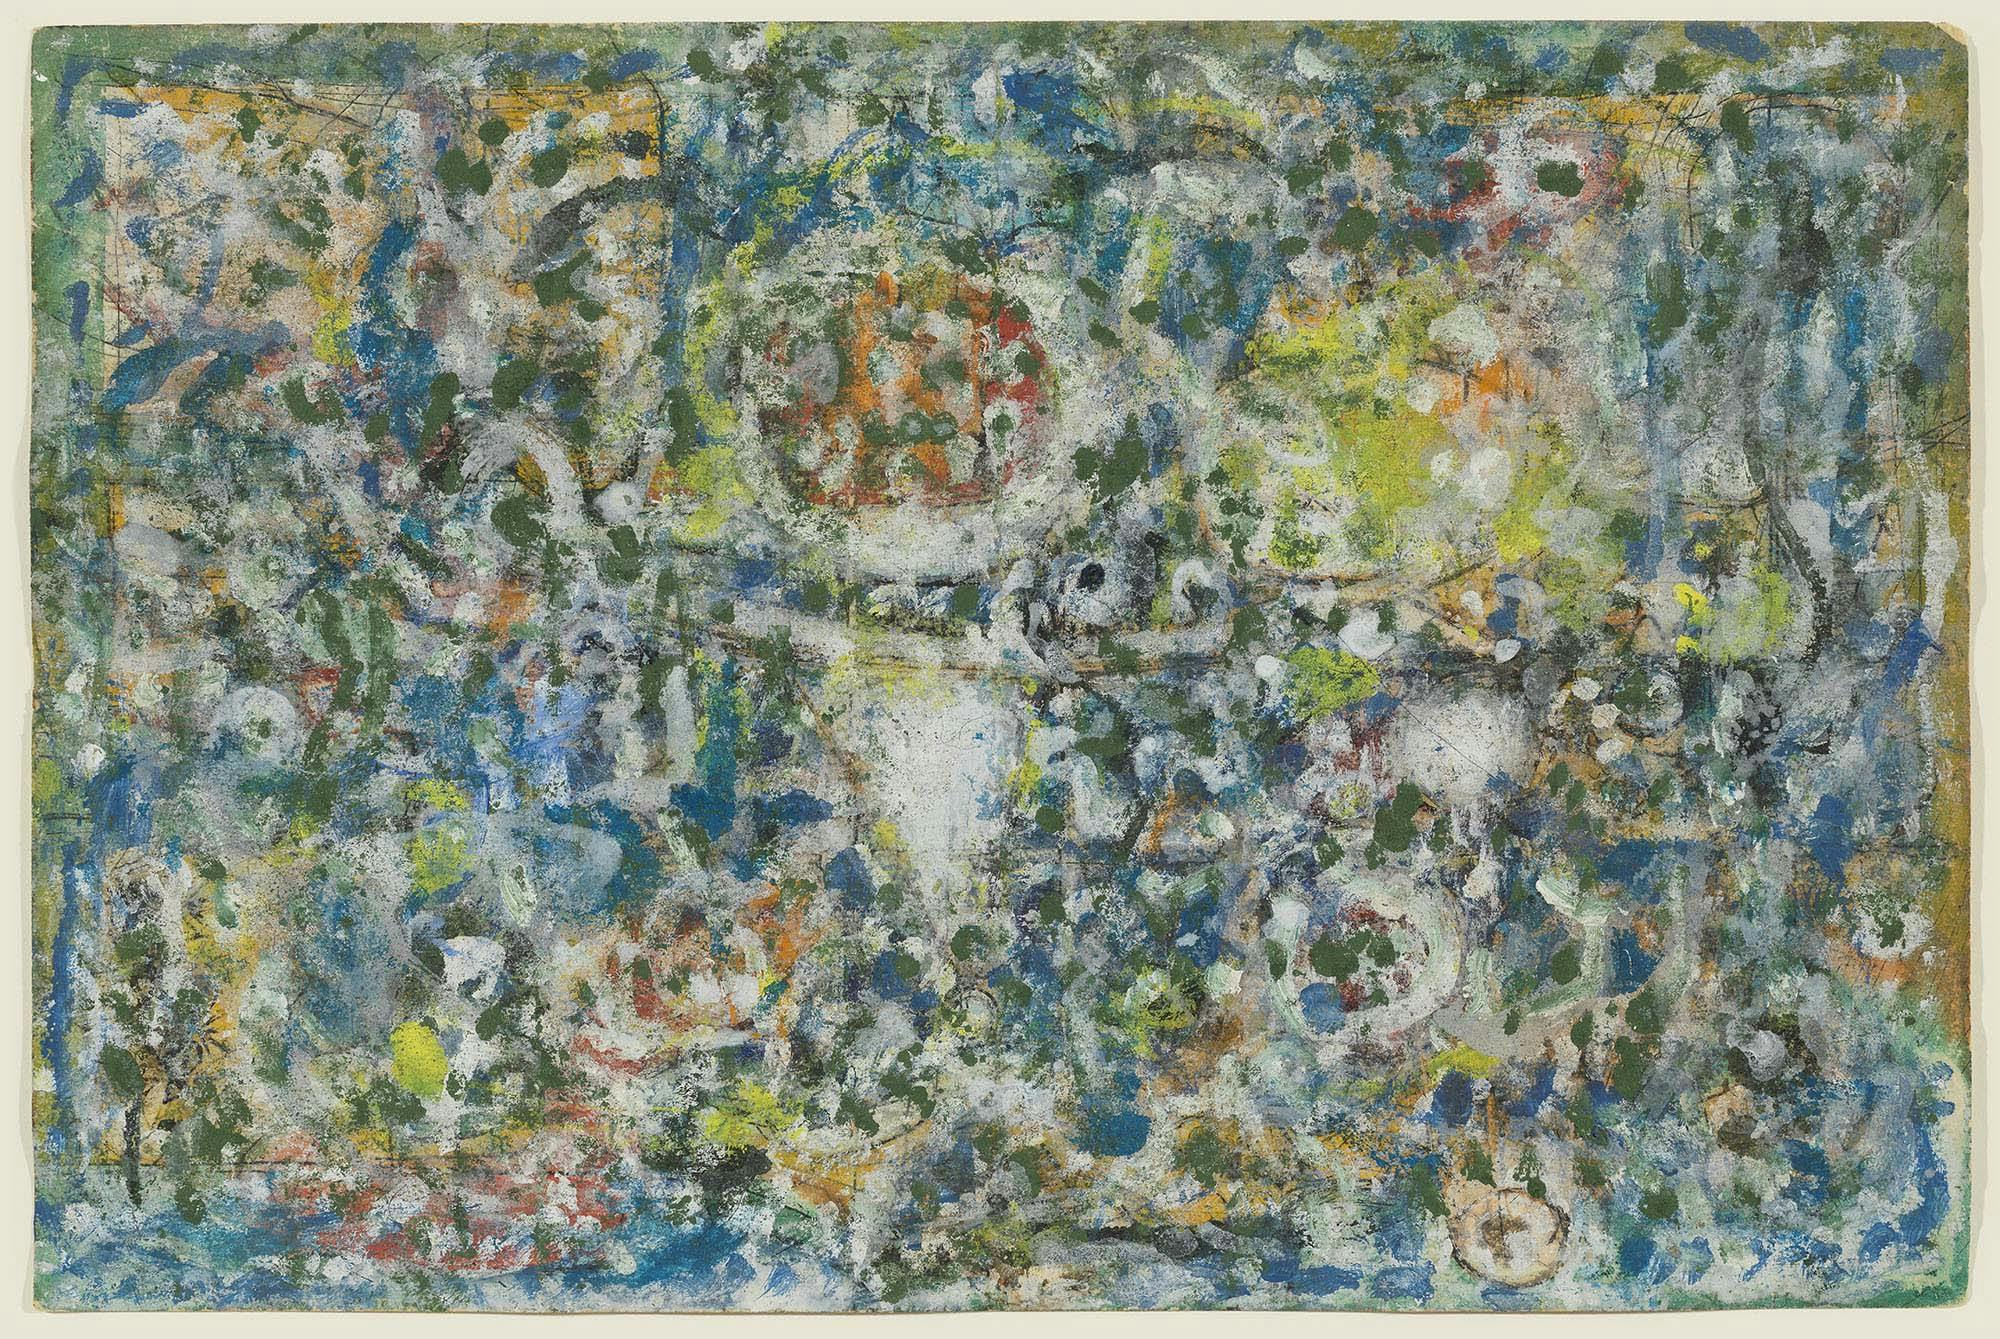 Dance of Spring (Nebulous Garden)
c. 1960
Gouache, watercolor, ink and graphite on paper
11 7/8 x 17 7/8 in. (30.2 x 45.4 cm)
 – The Richard Pousette-Dart Foundation